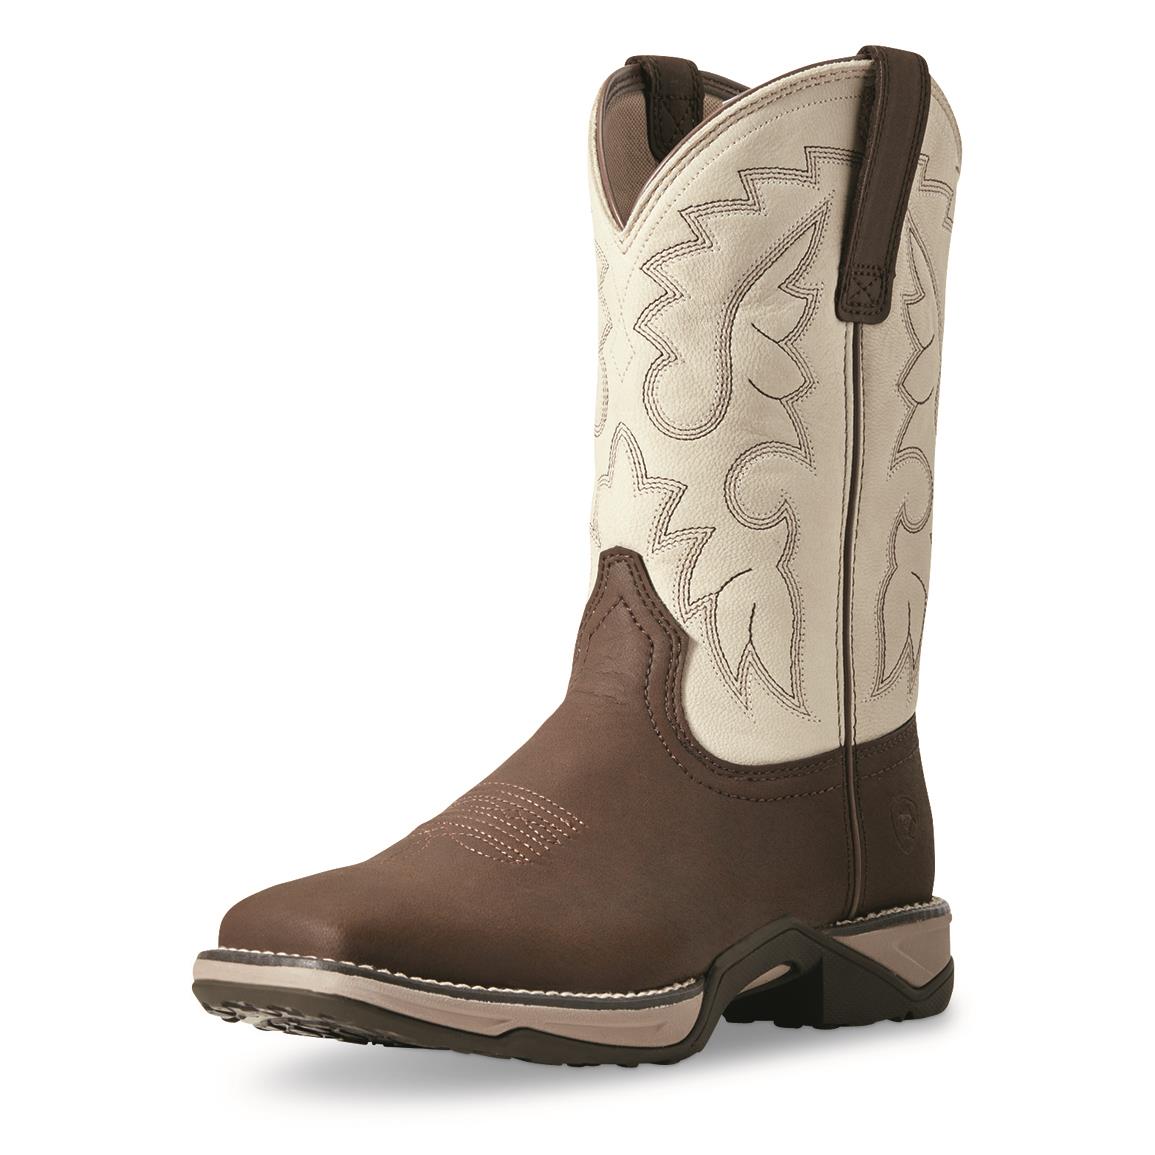 Ariat Women's Anthem II Square Toe Western Boots